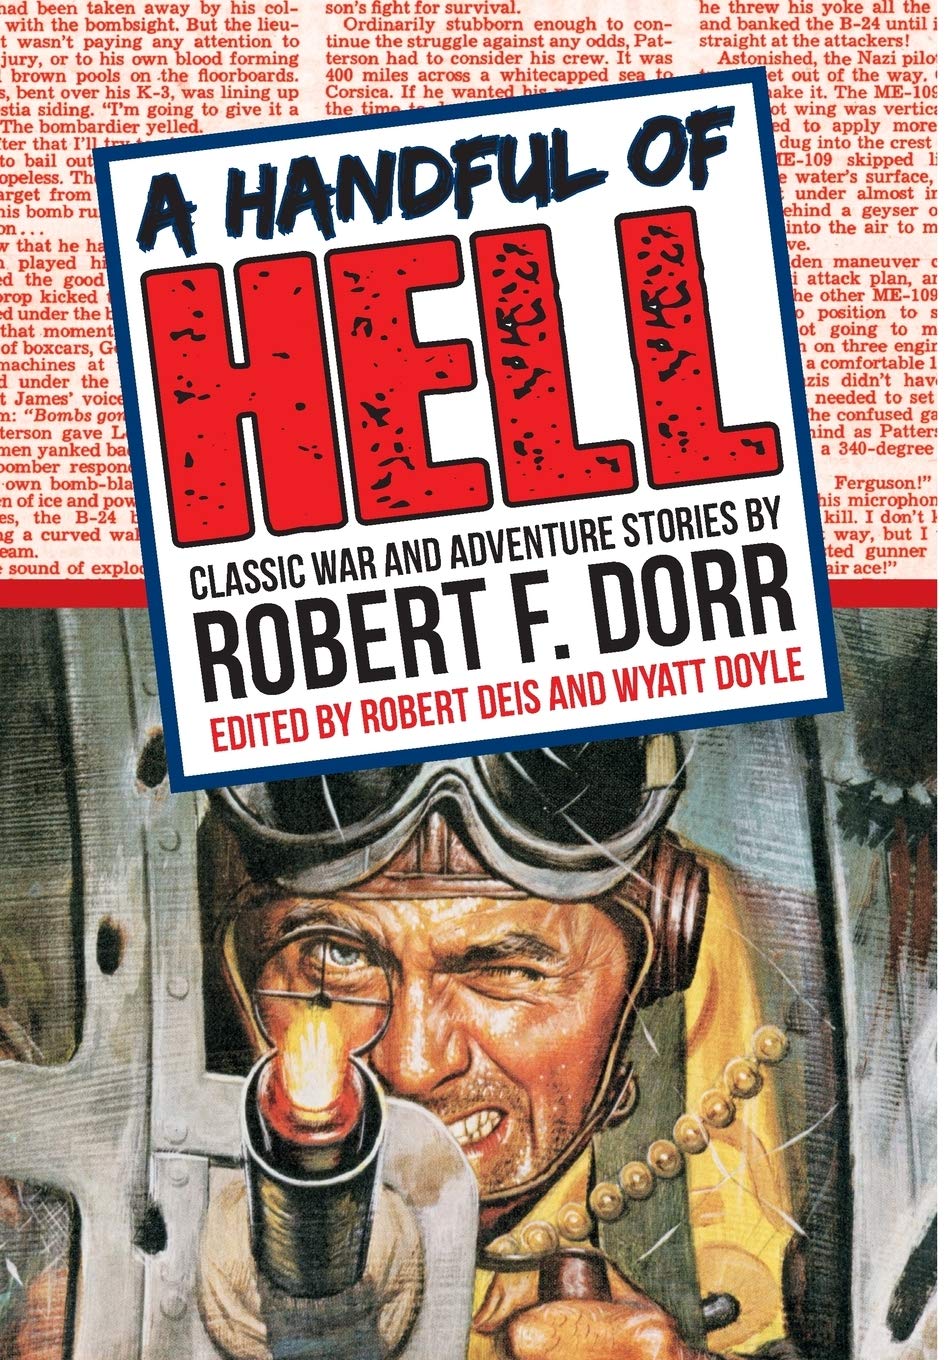 A Handful of Hell: Classic War & Adventure Stories by Robert F. Dorr - Expanded Hardcover Edition